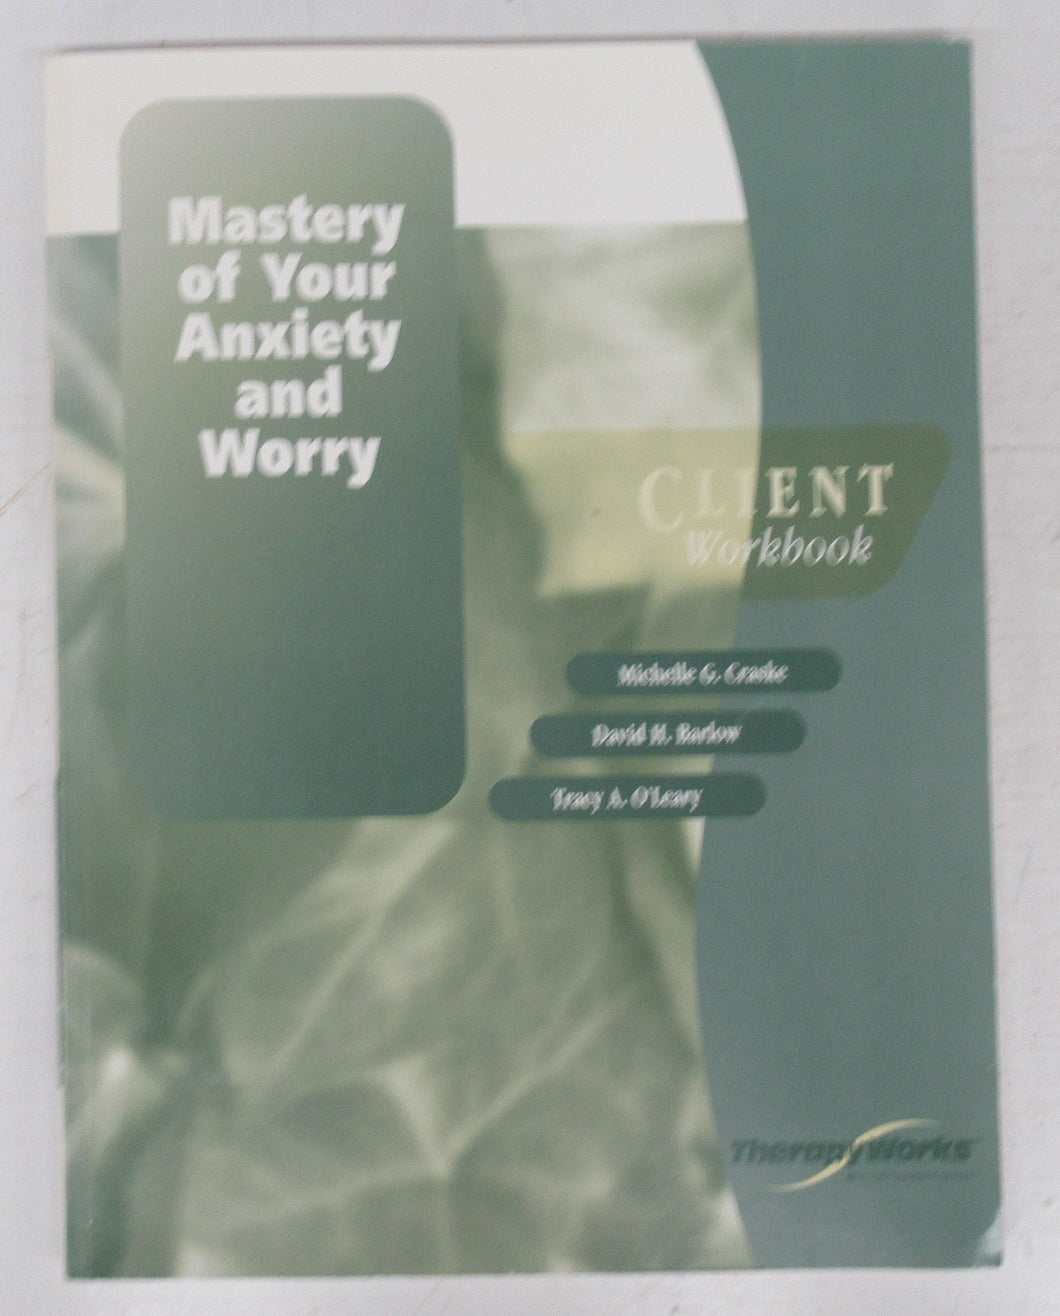 Mastery of Your Anxiety and Worry Client Workbook